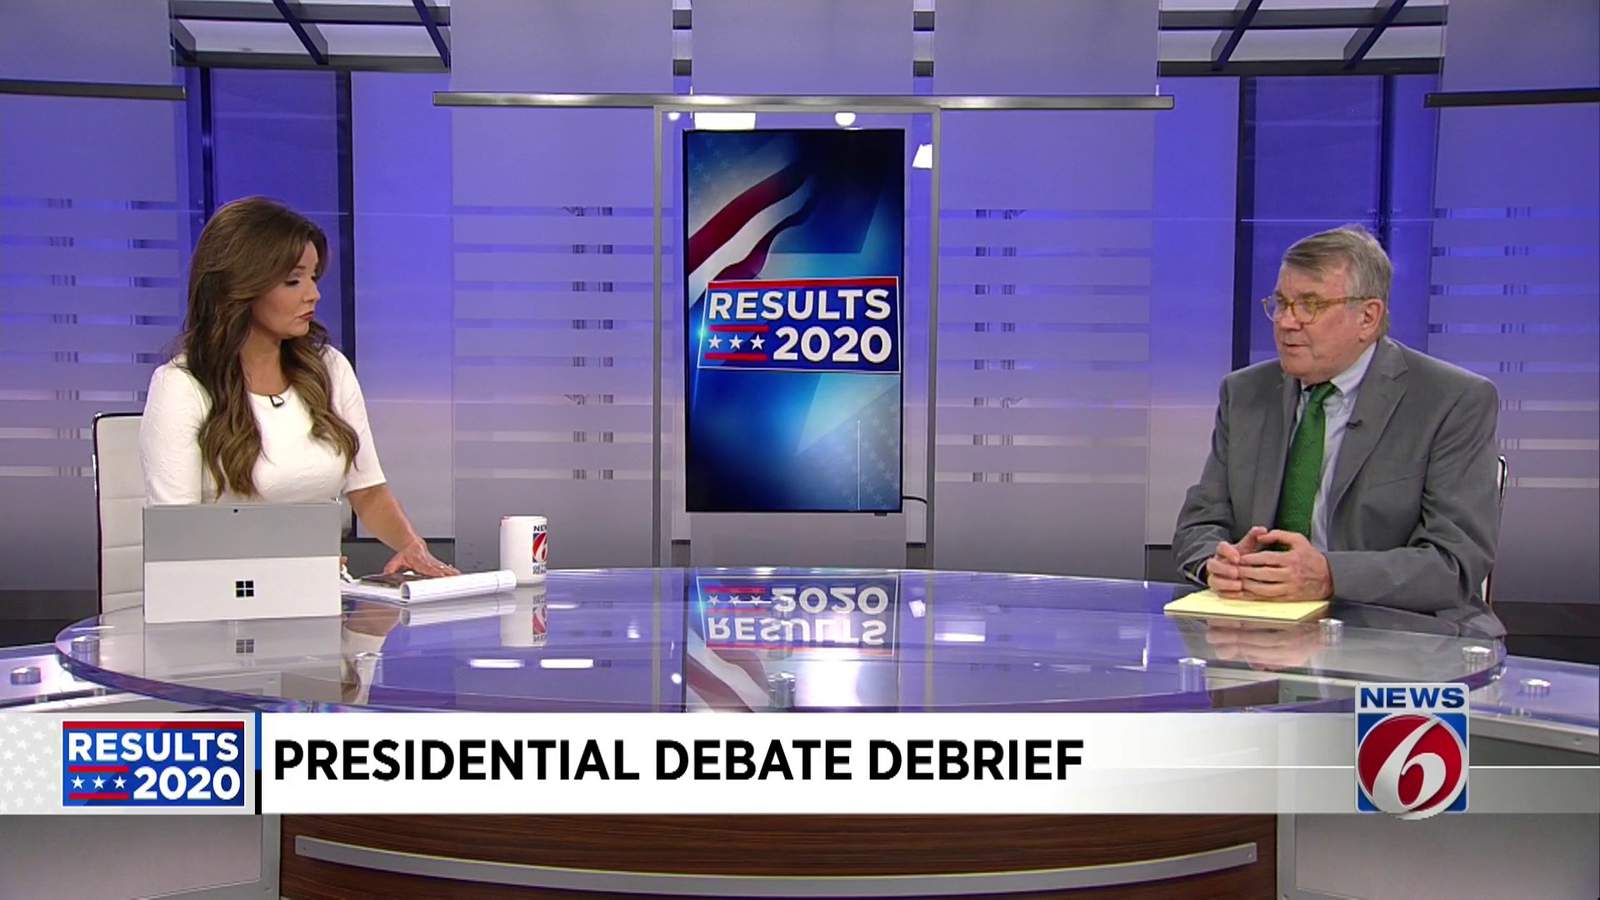 ‘The arguments are being heard:’ UCF professor reacts to final presidential debate